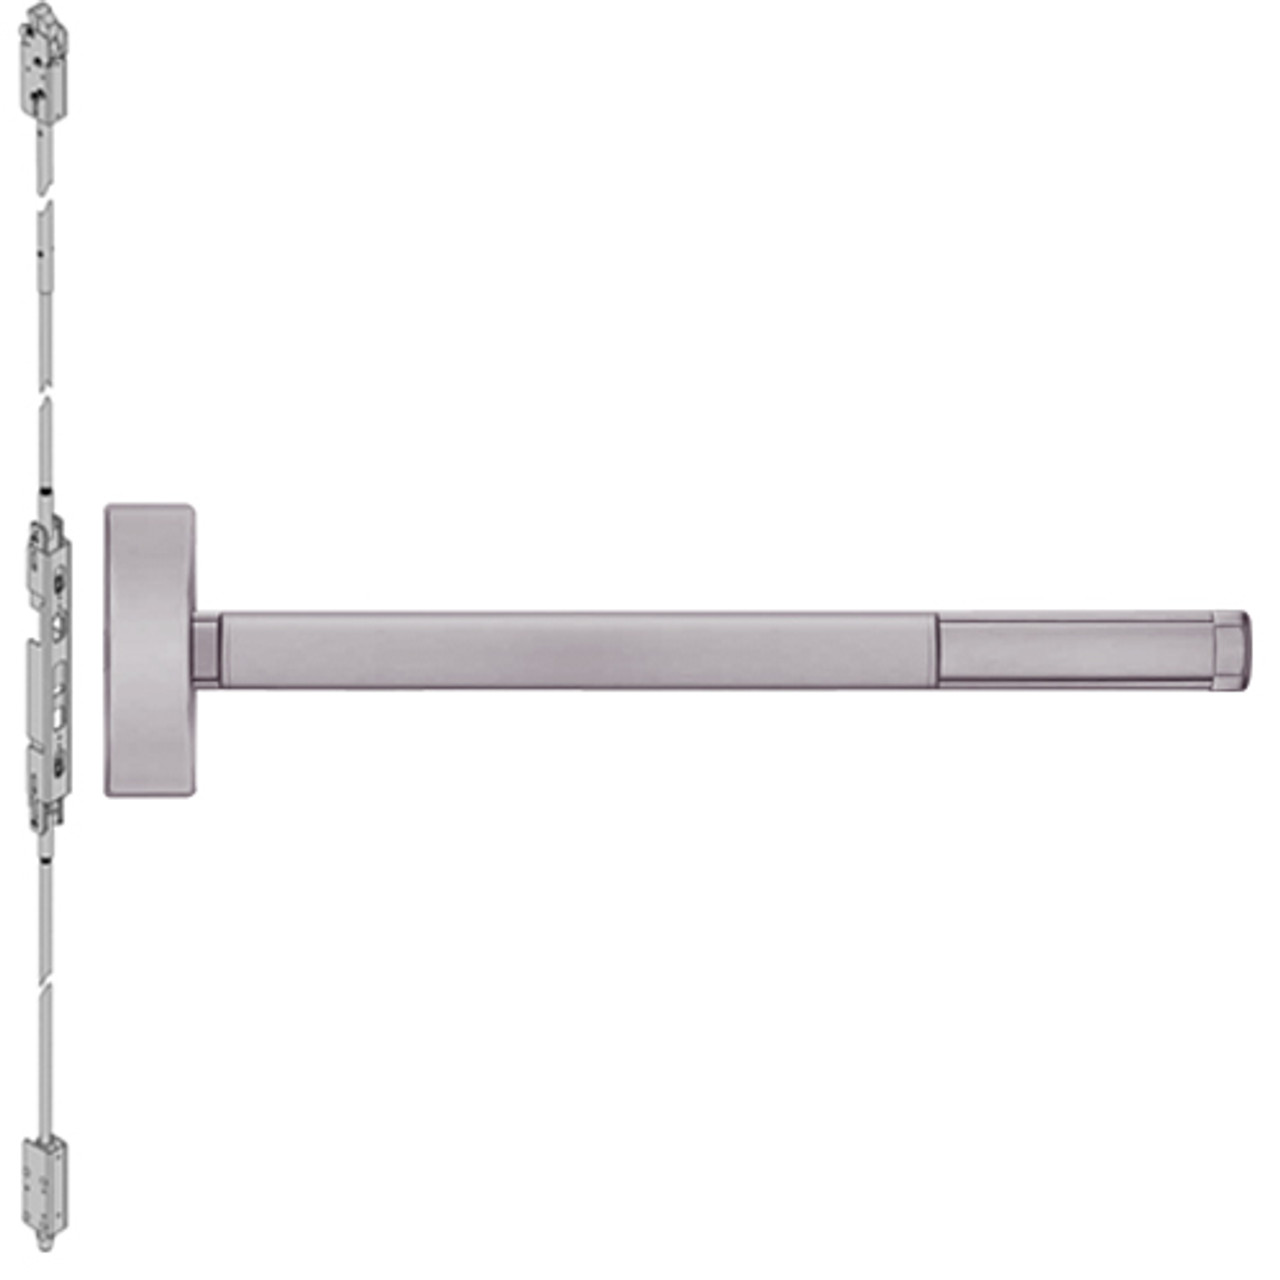 DE2802-630-48 PHI 2800 Series Concealed Vertical Rod Exit Device with Delayed Egress Prepped for Dummy Trim in Satin Stainless Steel Finish